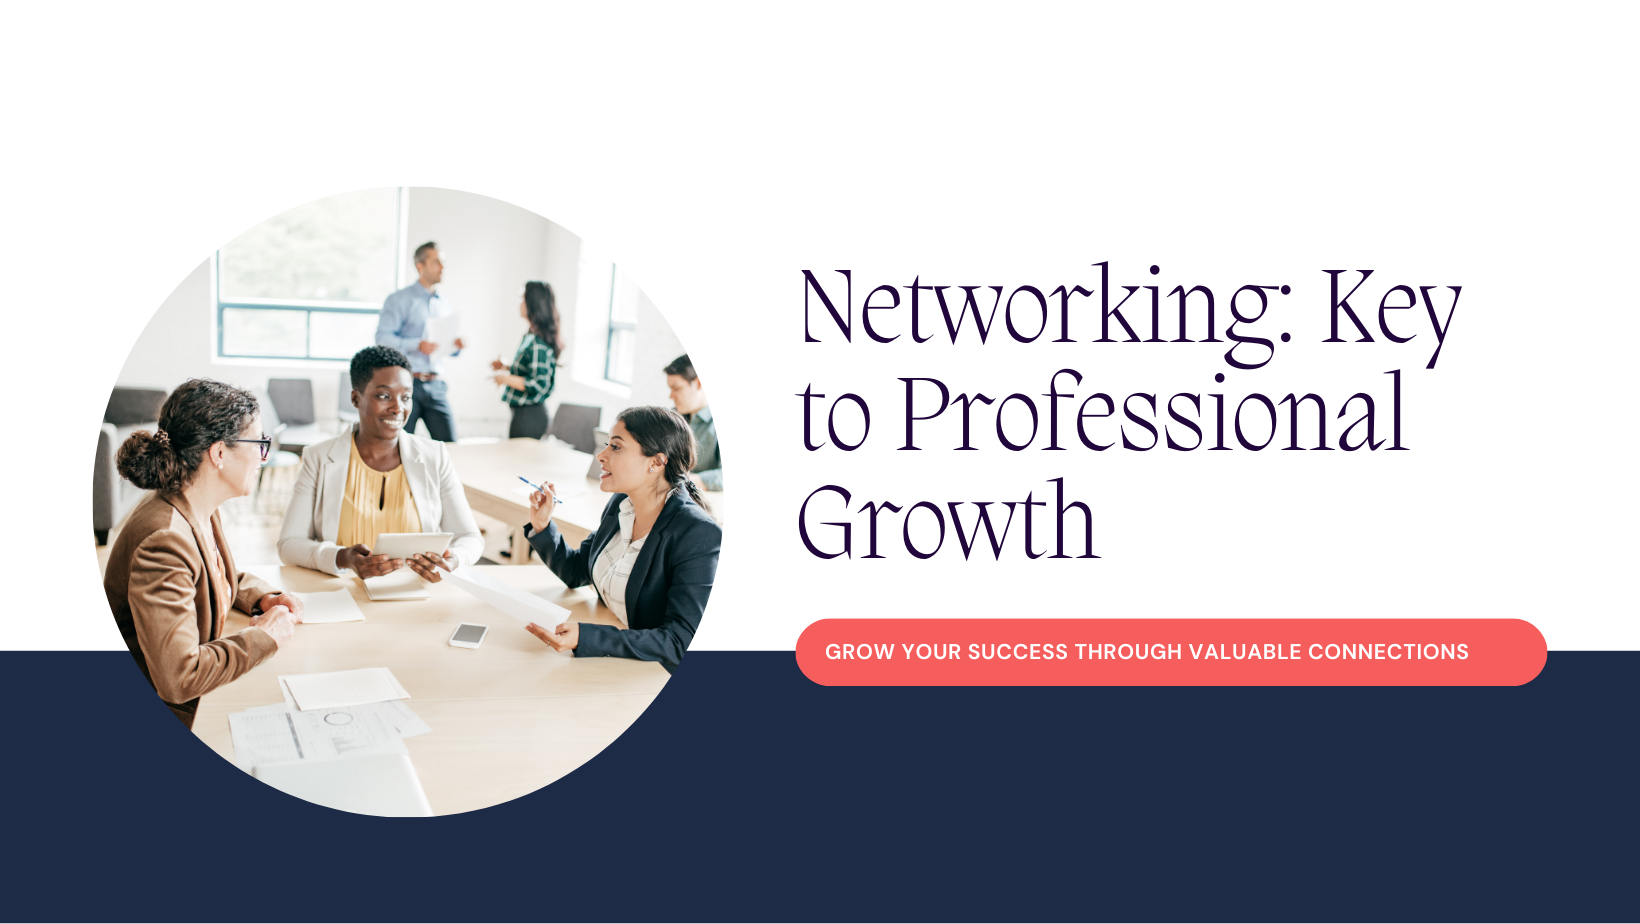 The Power of Business Networking: Building Connections for Professional Success